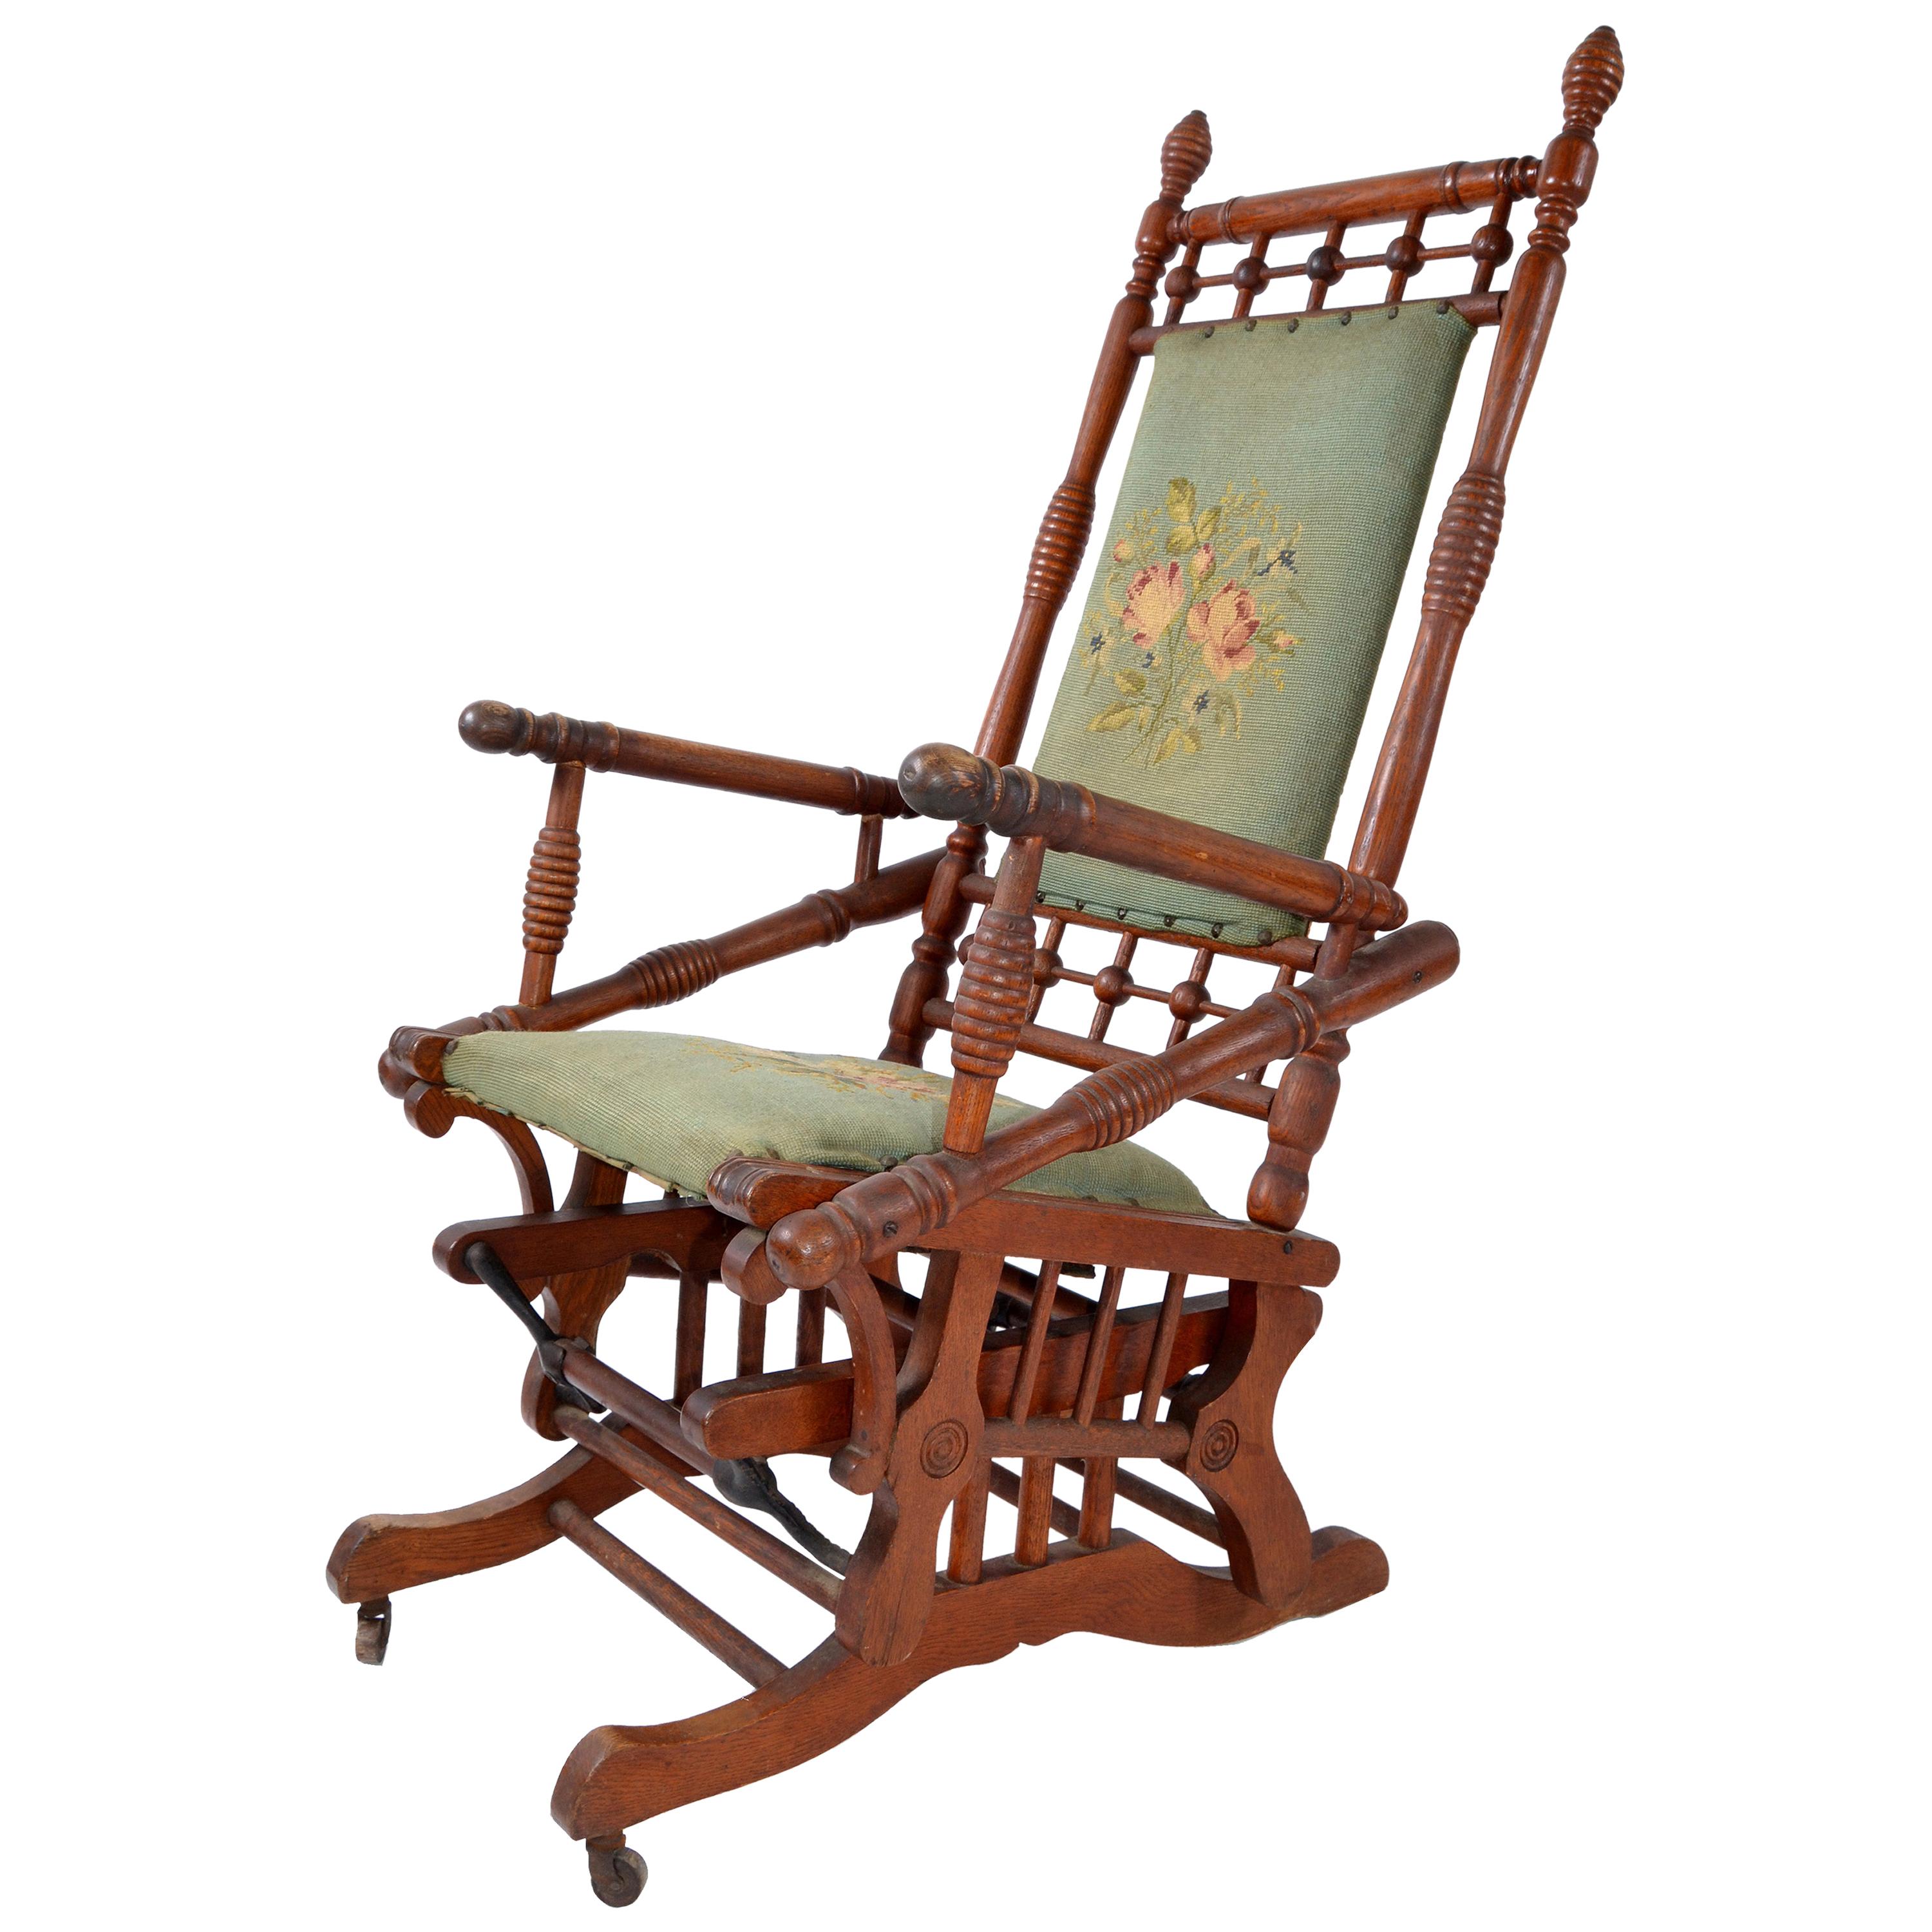 Antique Rocking Chair Hand Carved and Turned Walnut Wood Needlepoint Upholstery